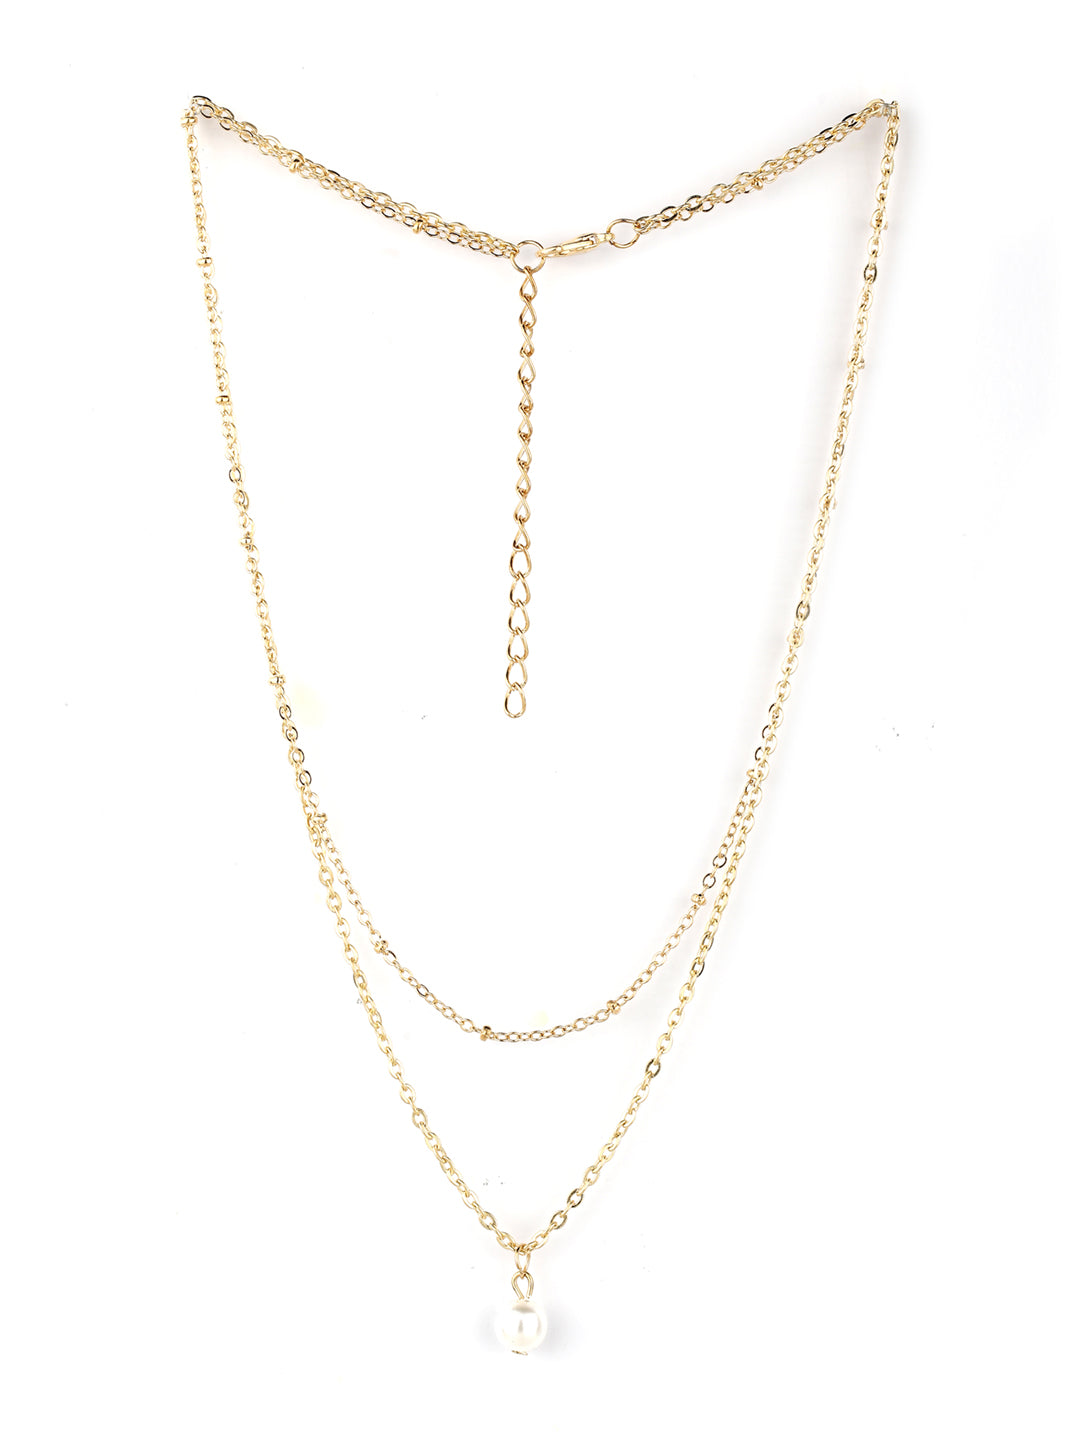 Women's  Gold Plated Pearl Layered Necklace - Priyaasi